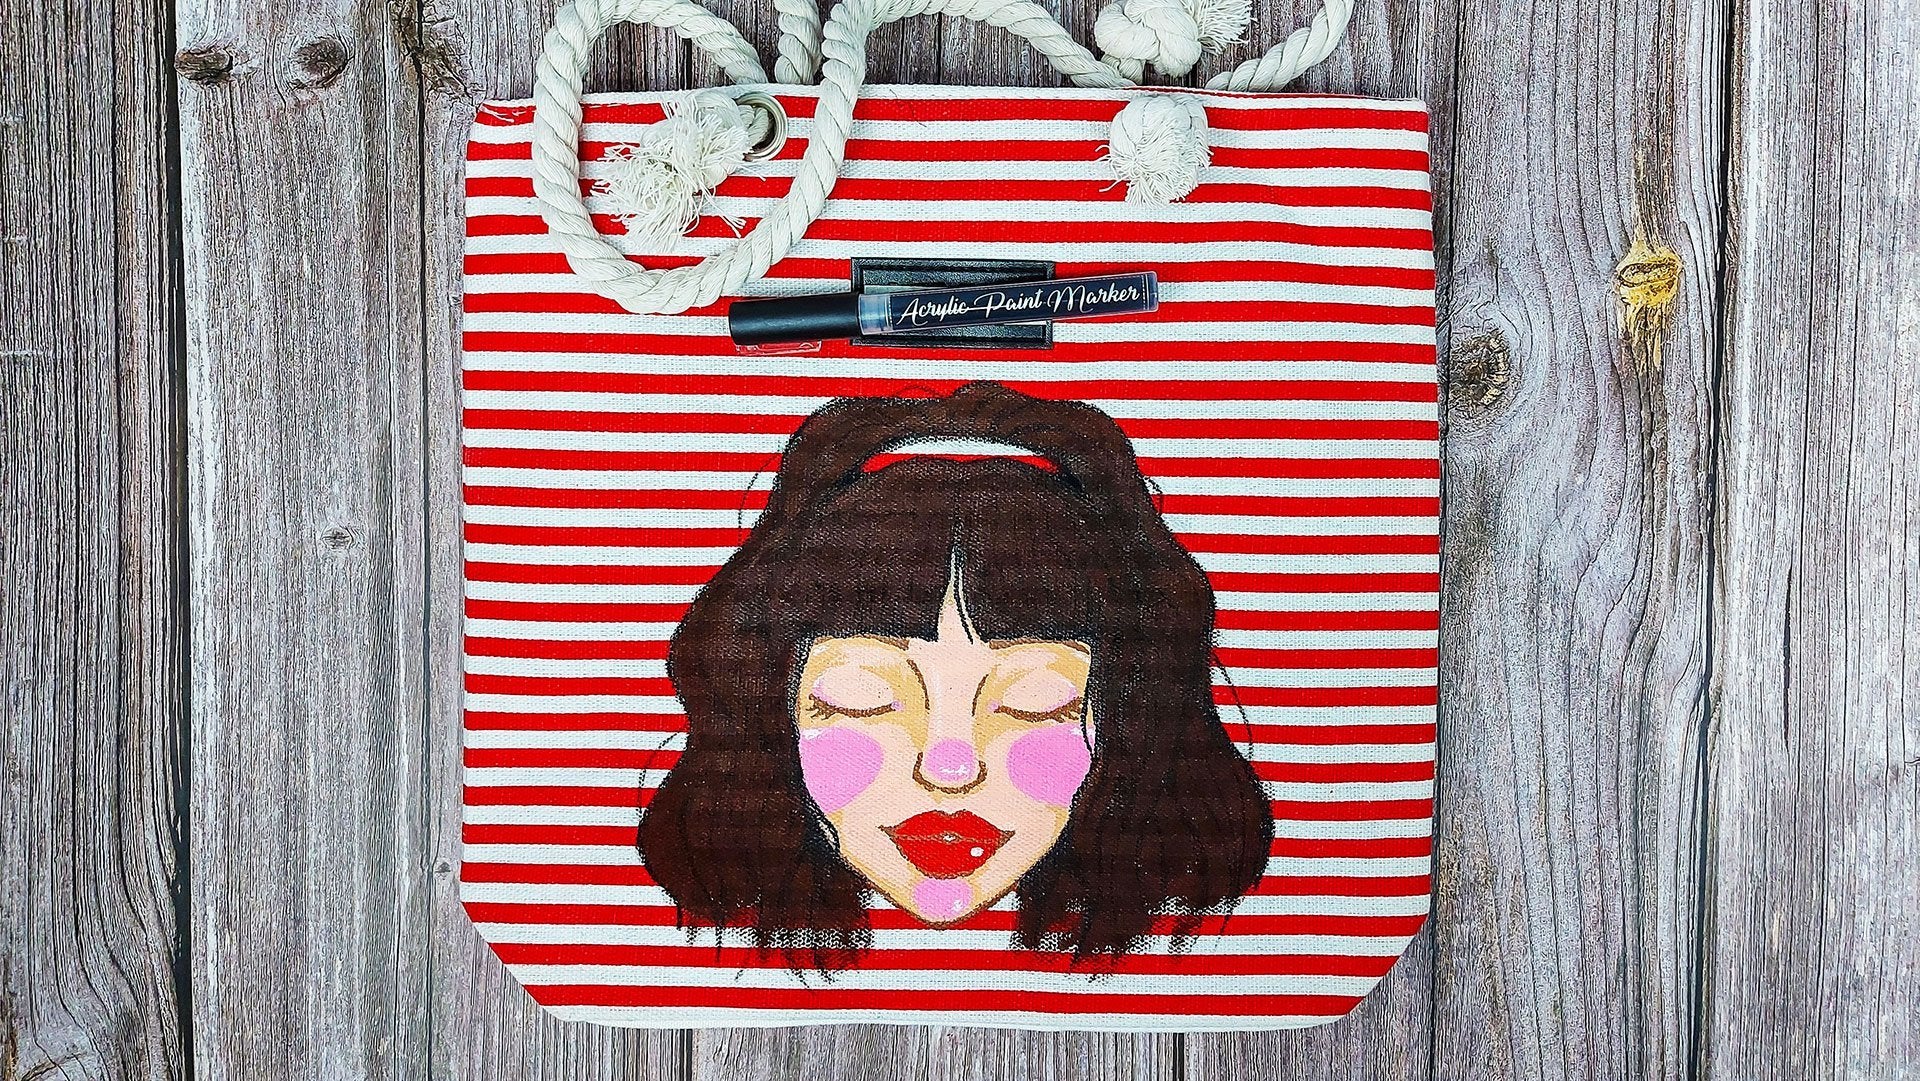 Bag painting ideas: 17 tote bag painting ideas & canvas bag